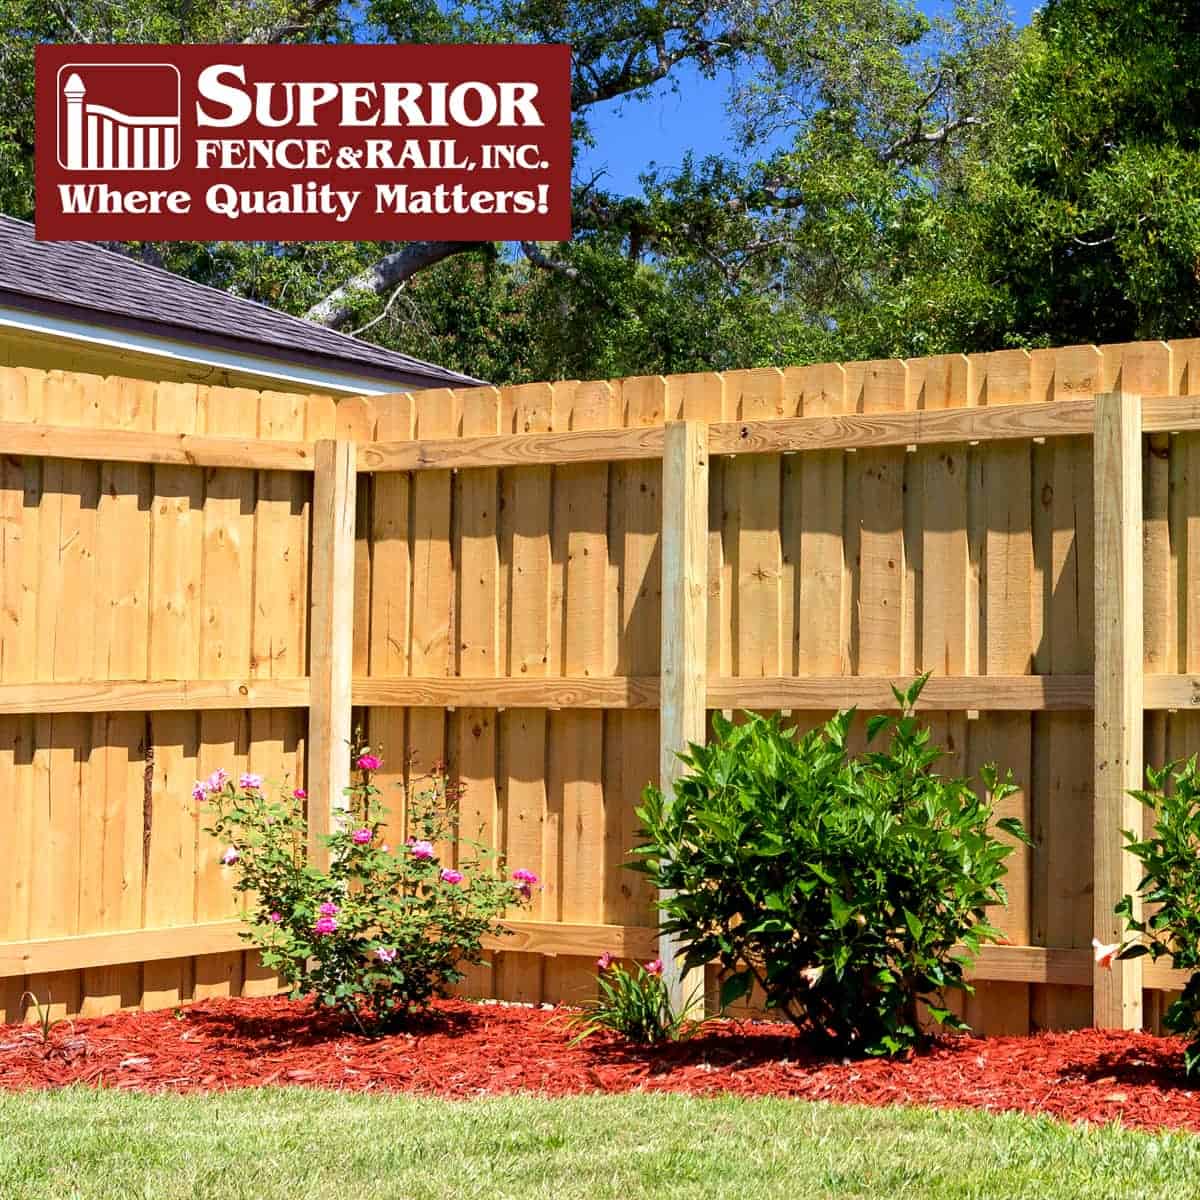 Crestwood fence company contractor